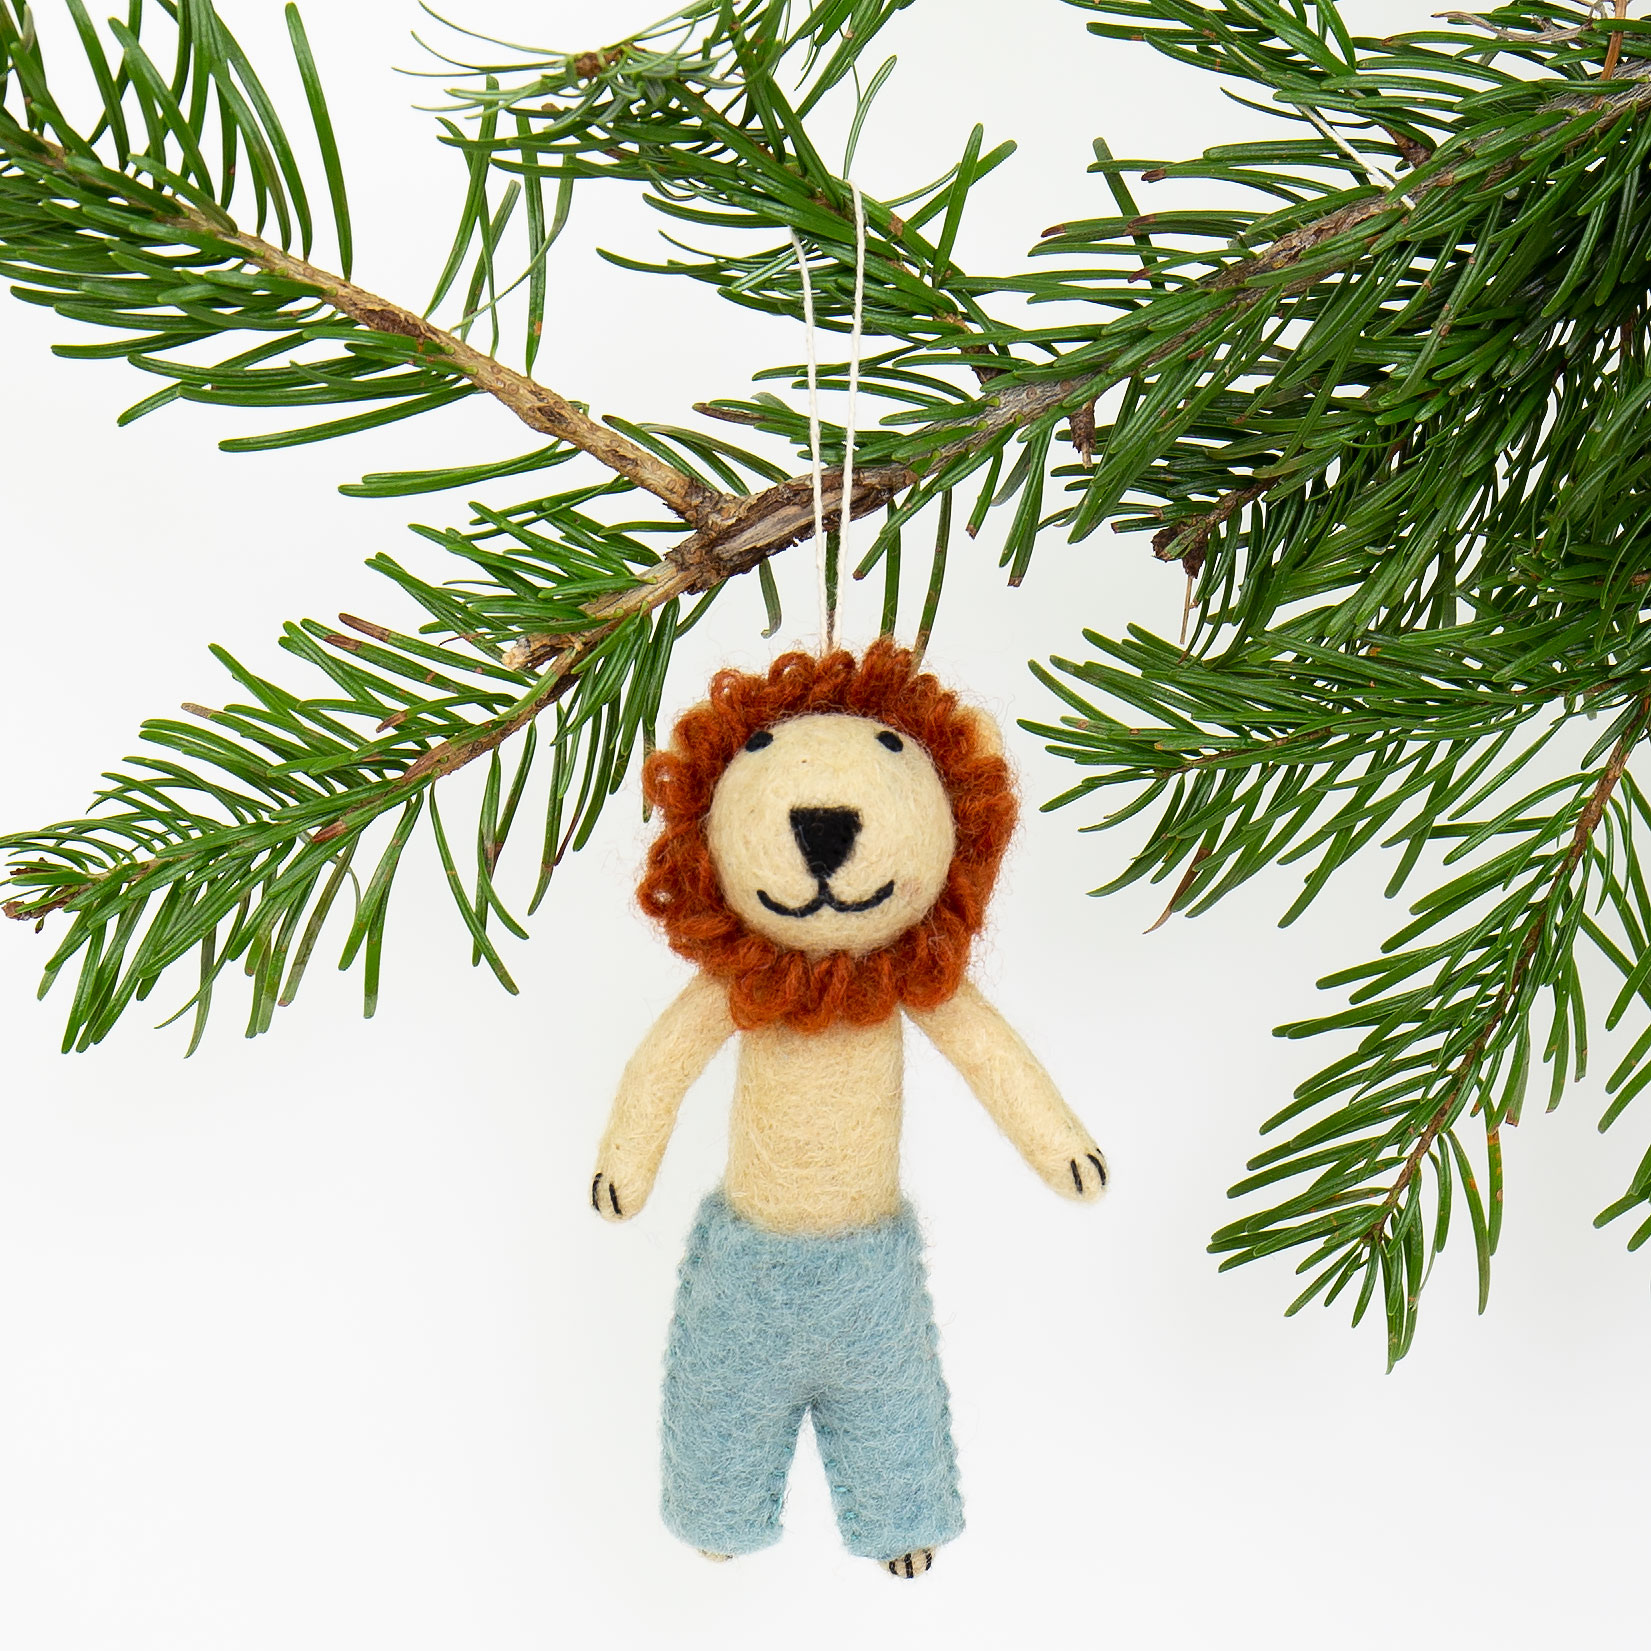 LION IN JEANS Christmas ornament